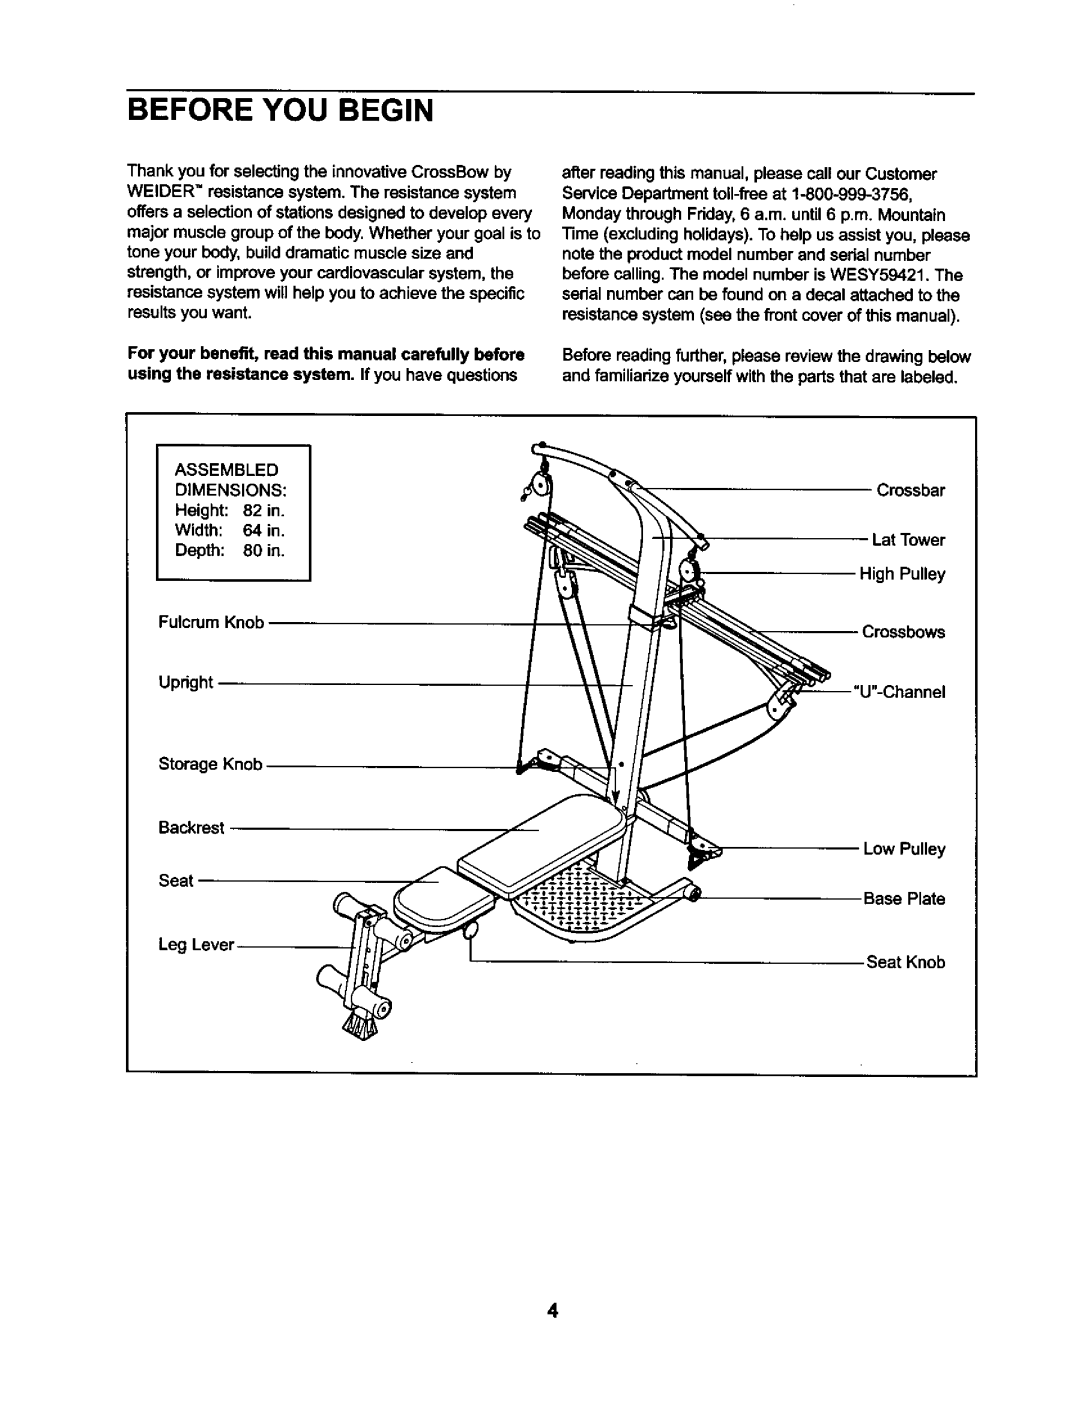 Weider WESY59421 user manual Before YOU Begin, Assembled Dimensions 